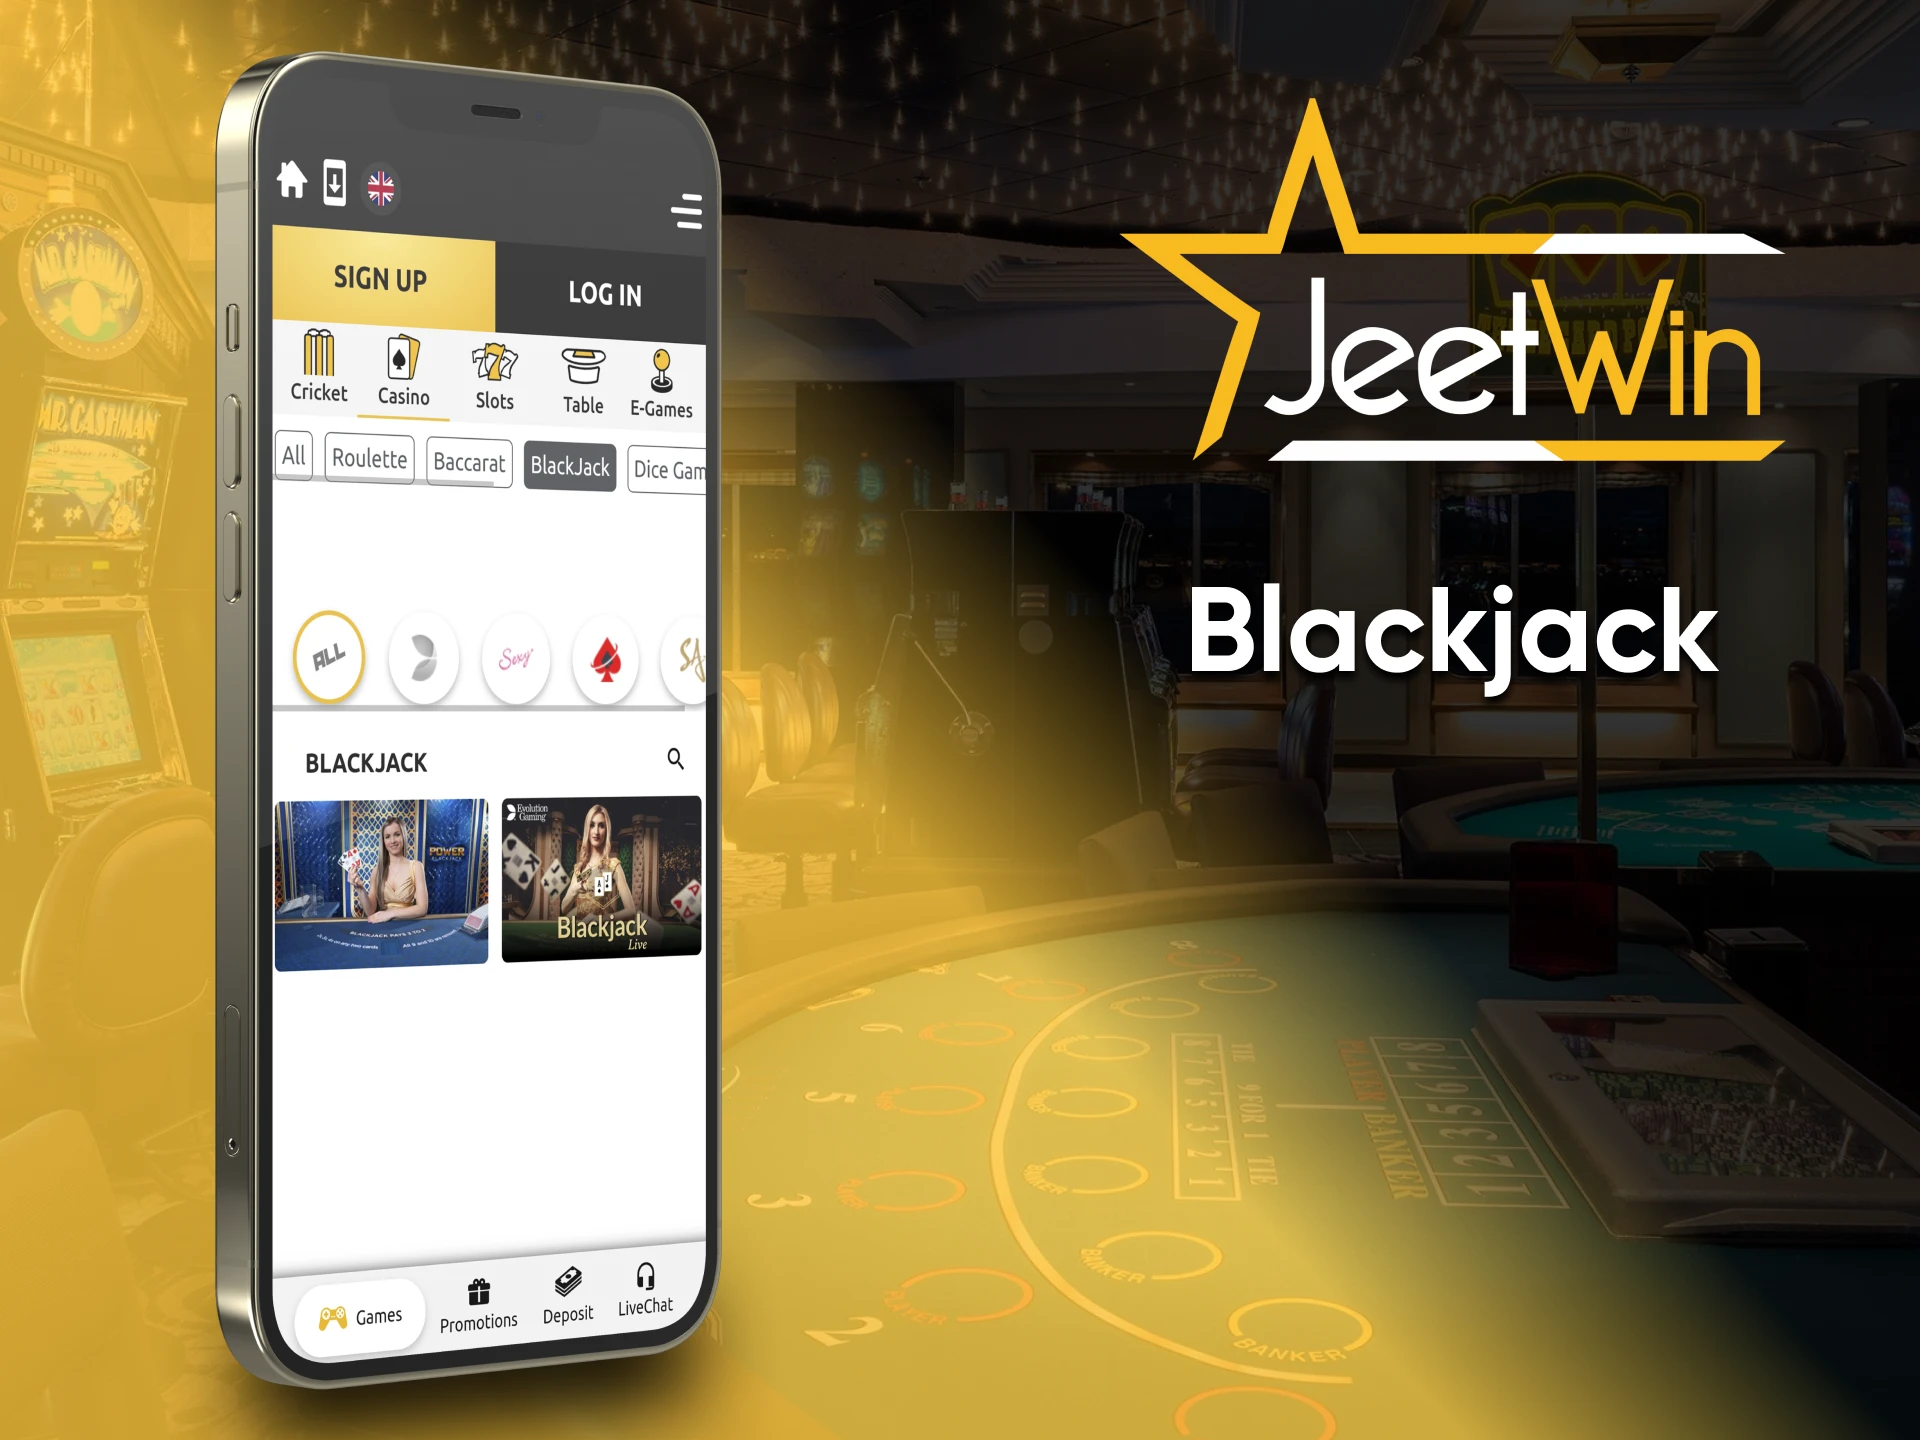 Blackjack is a game that you can play on Jeetwin.